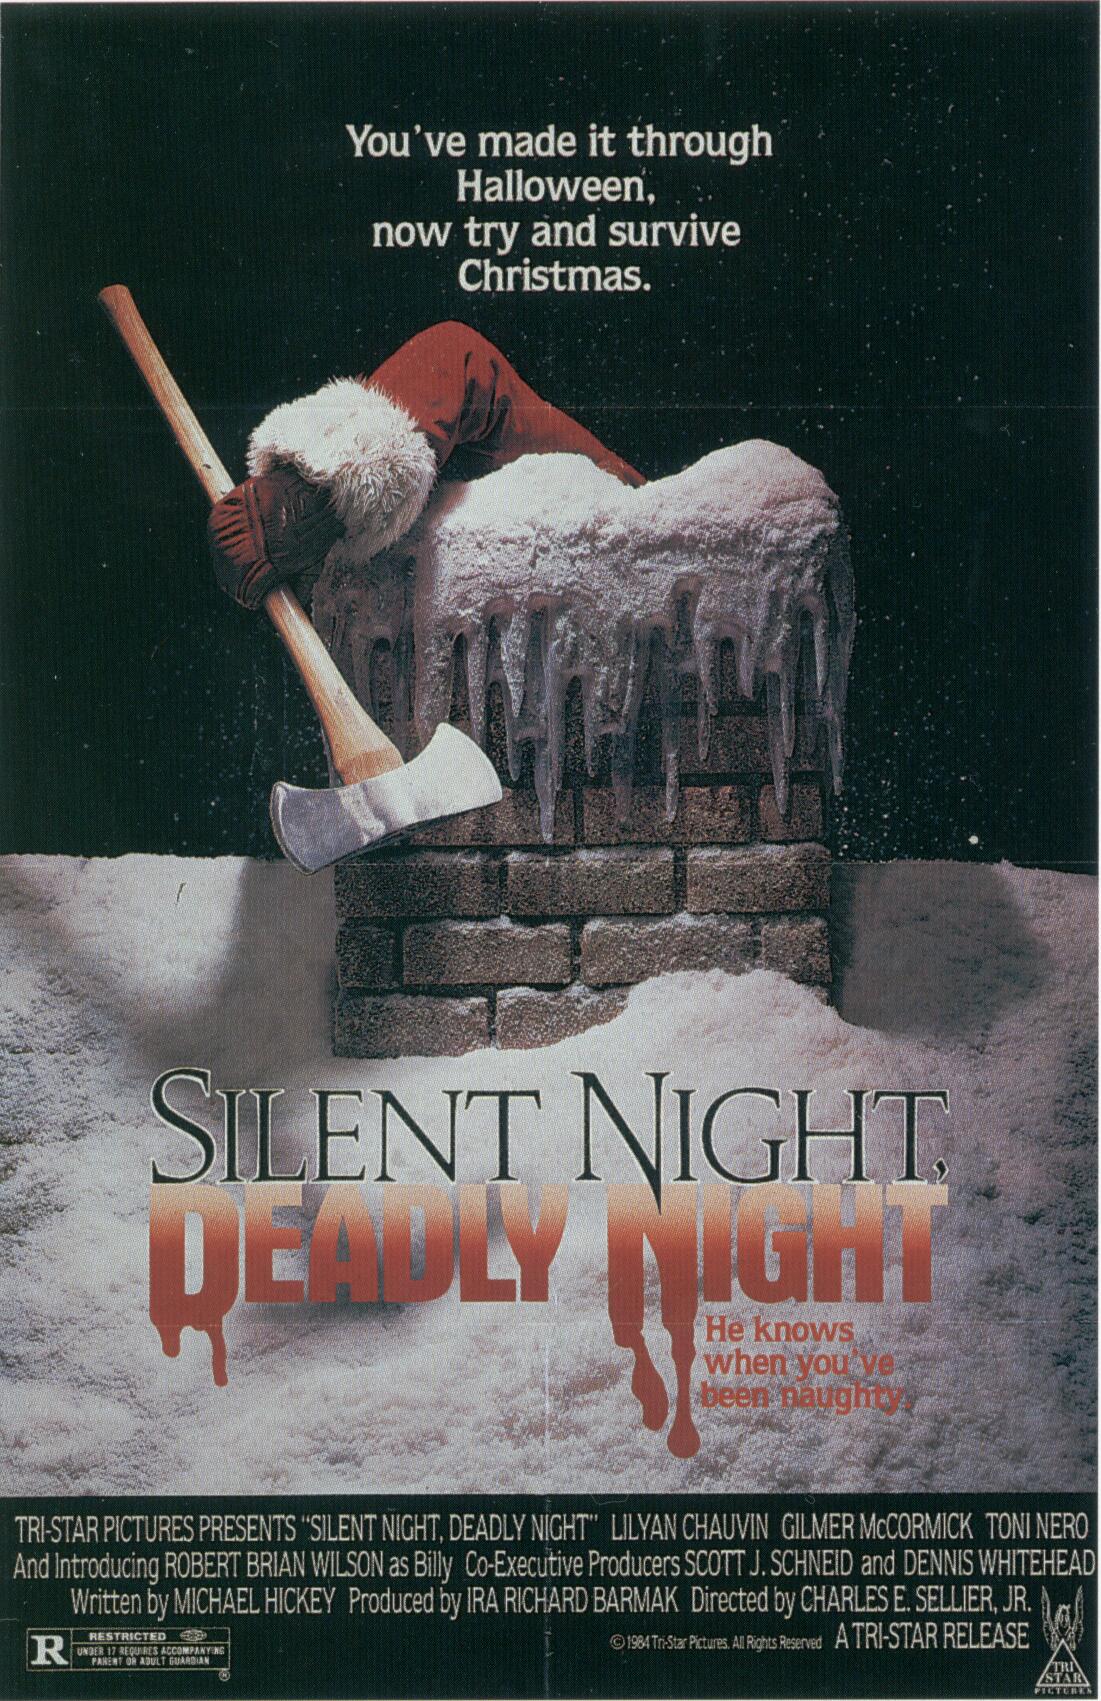 In the Film Silent Night, Deadly Night (1984) what was it that put Billy in an orphanage?